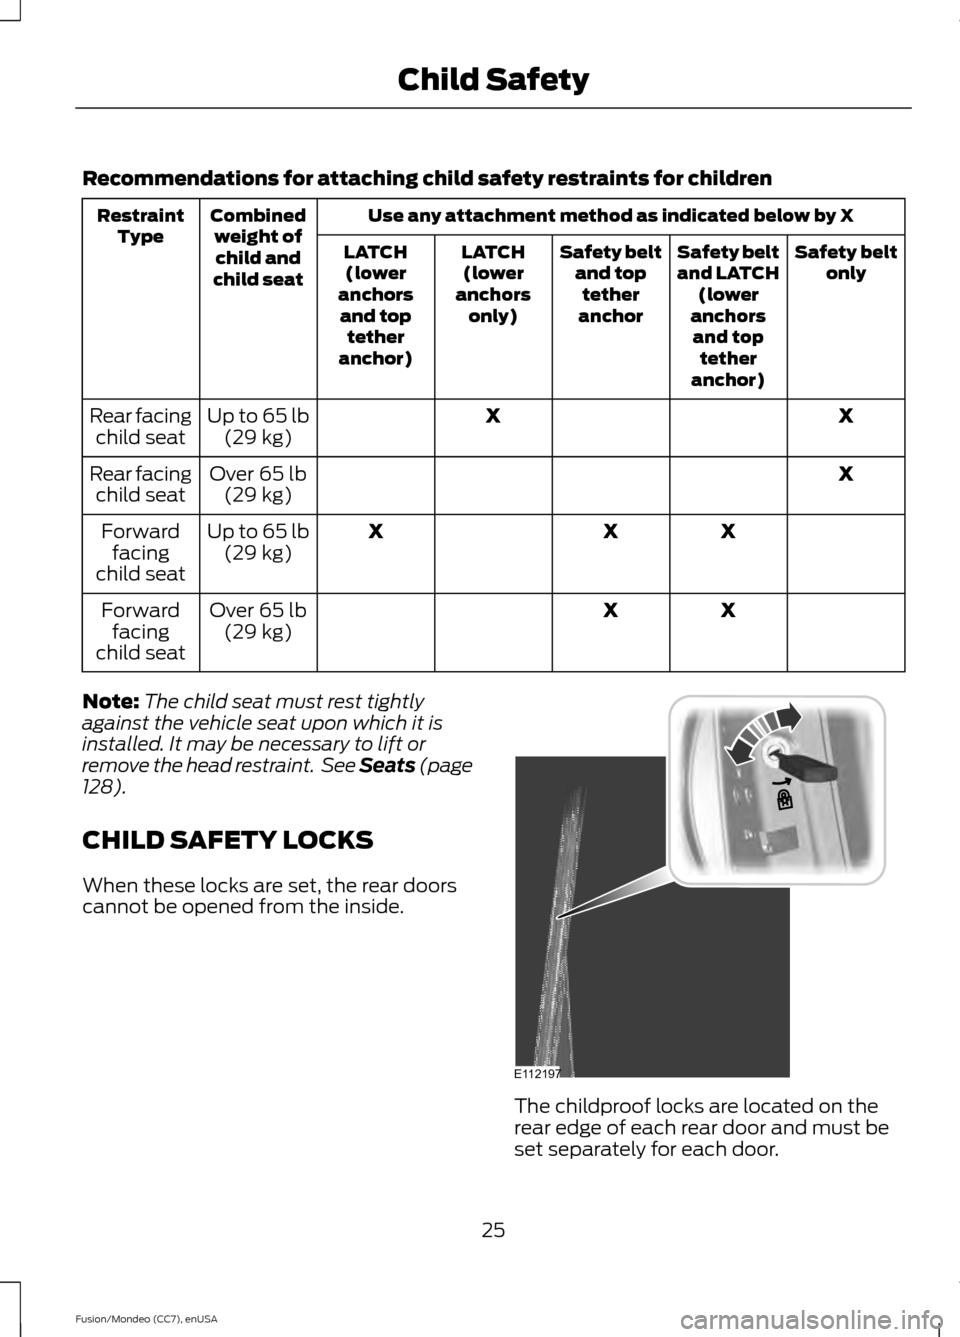 FORD FUSION (AMERICAS) 2015 2.G Owners Manual Recommendations for attaching child safety restraints for children
Use any attachment method as indicated below by X
Combined
weight ofchild and
child seat
Restraint
Type Safety belt
only
Safety belt
